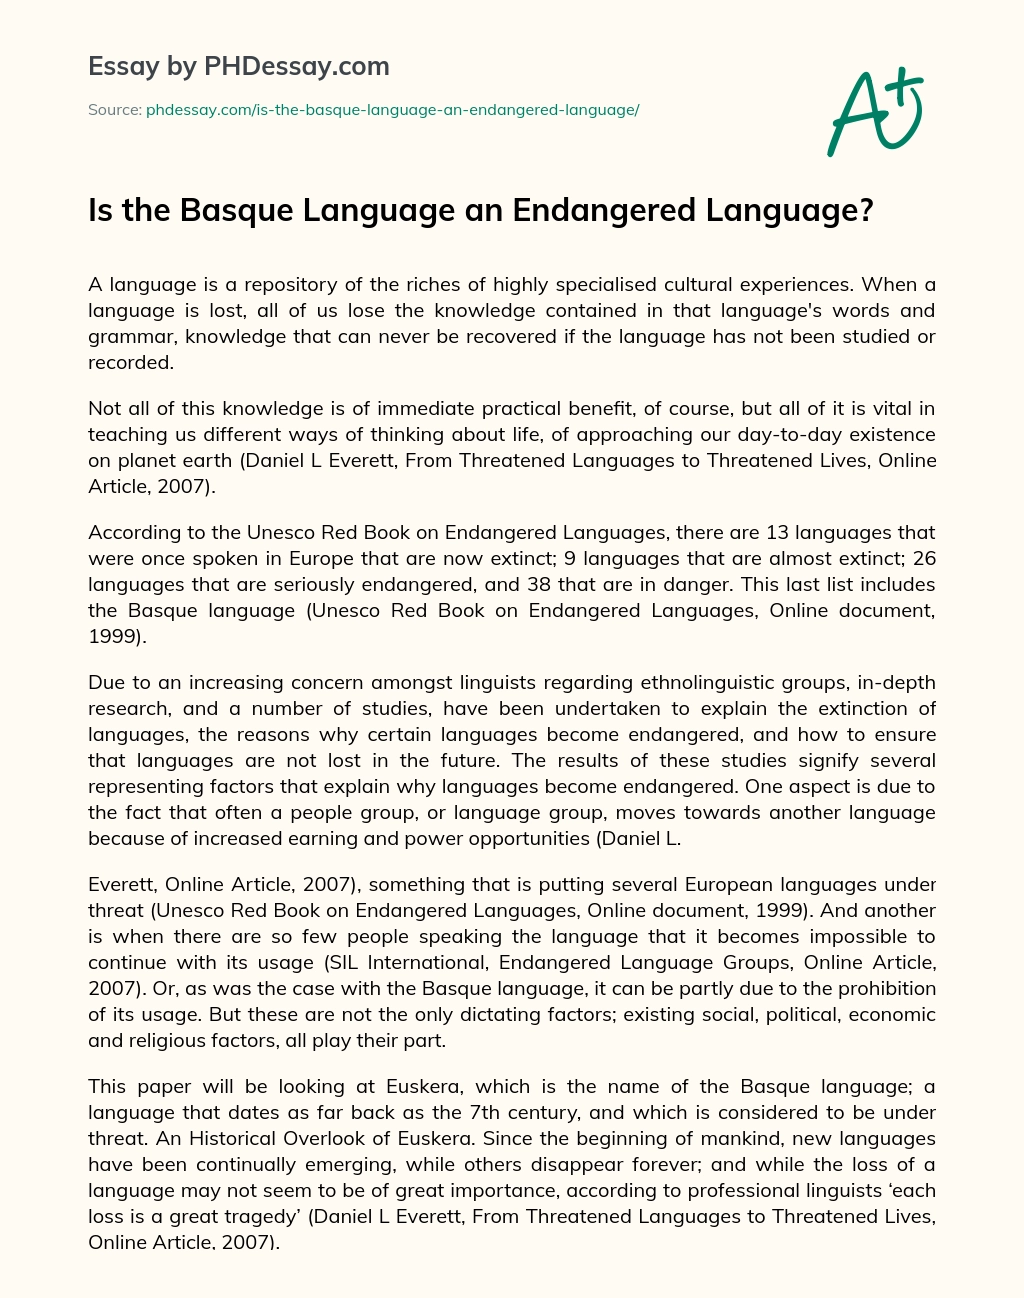 Is the Basque Language an Endangered Language? essay